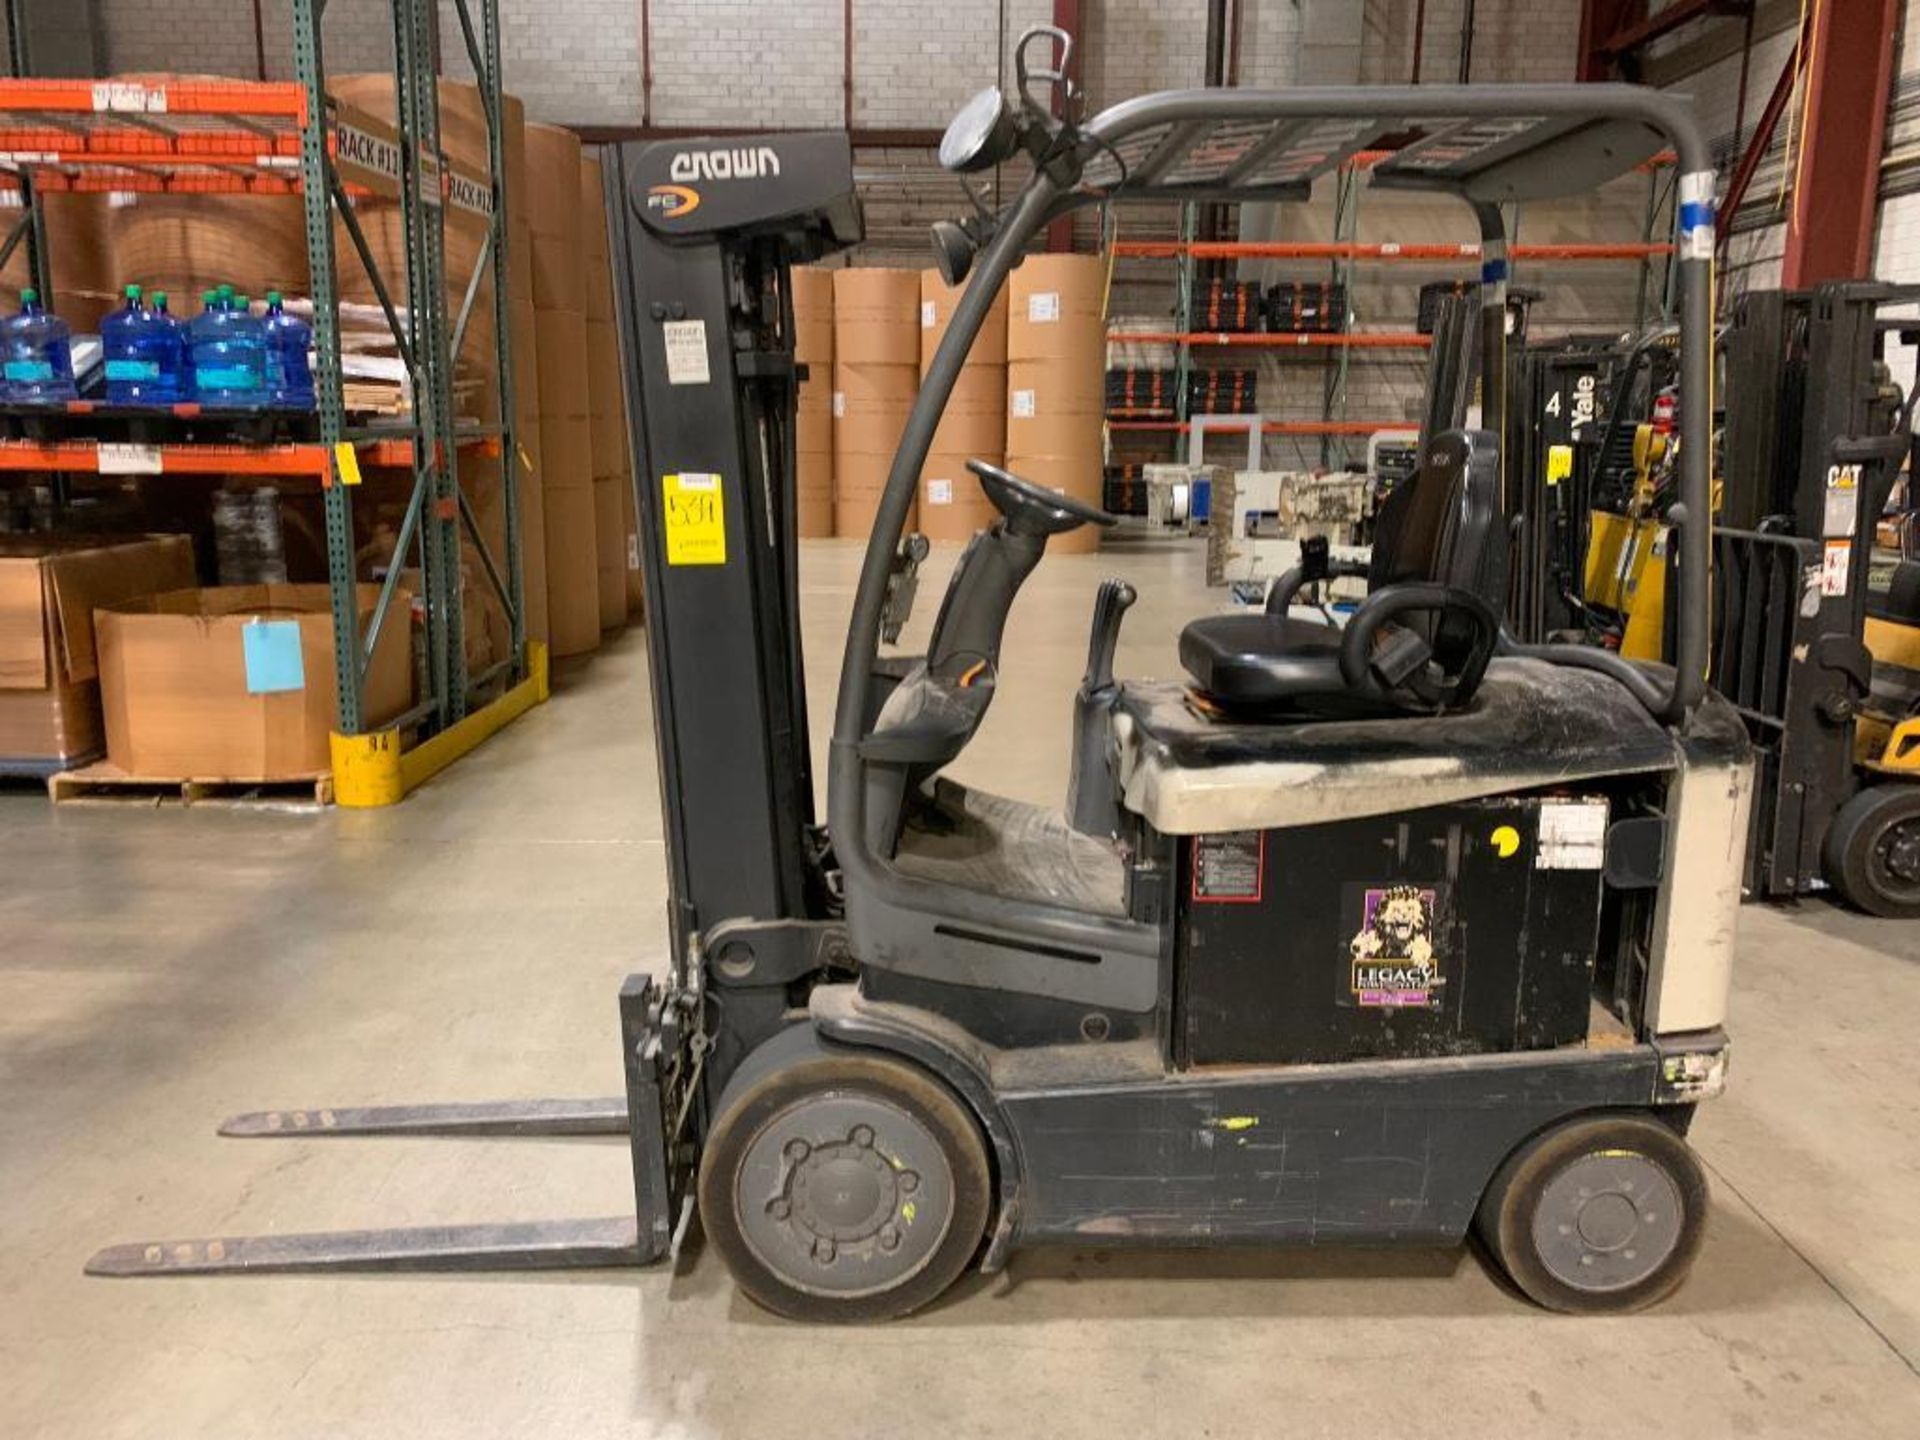 Crown 5,000 LB. Capacity Electric Forklift, Model FC4525-50, FC4500 Series, 36V, 3-Stage Mast, 188"